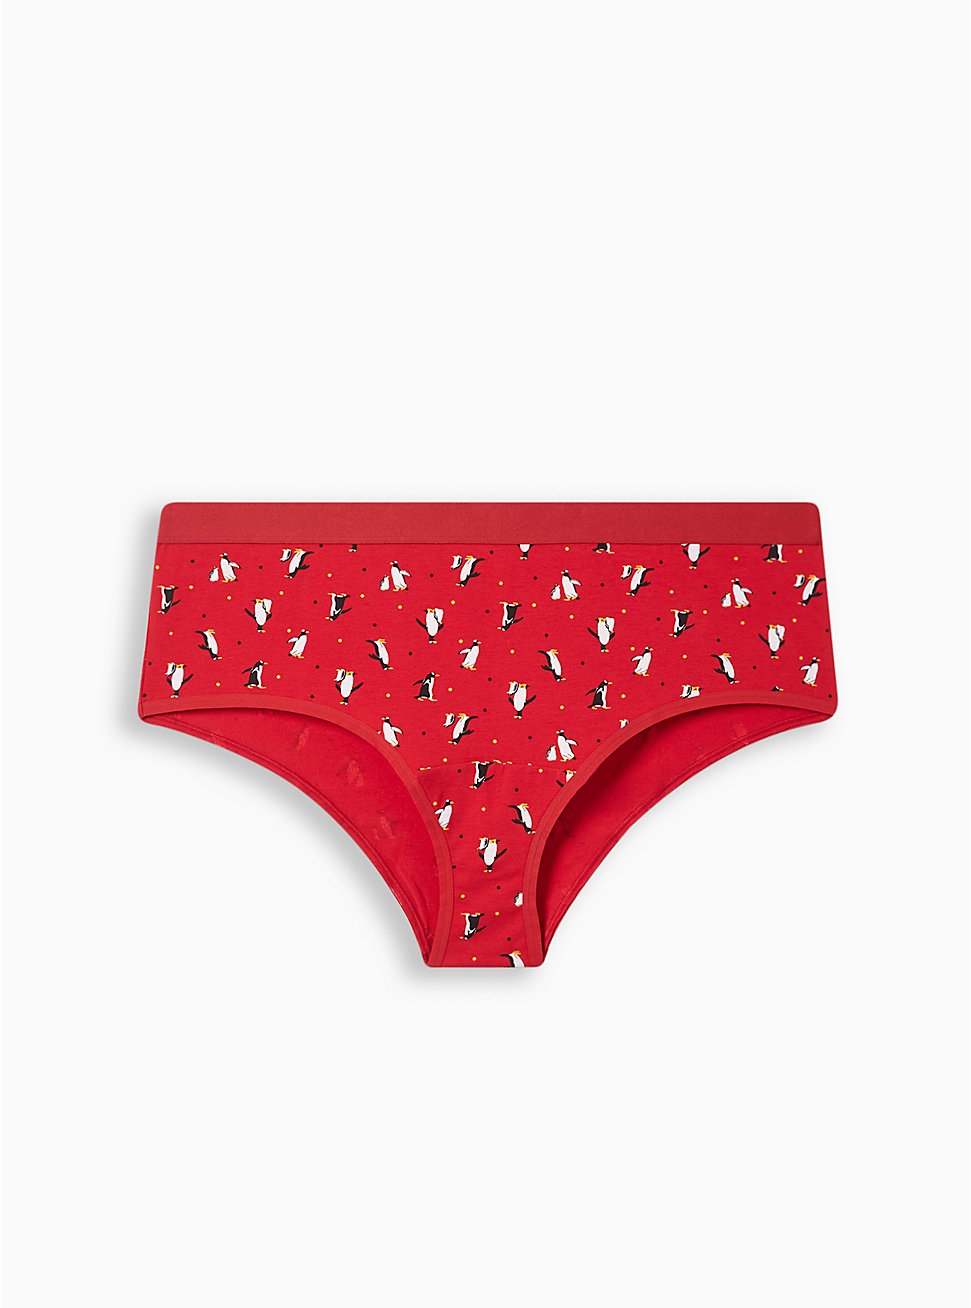 Plus Size Cotton Mid-Rise Cheeky Panty, PENGUINS RED DOT, hi-res